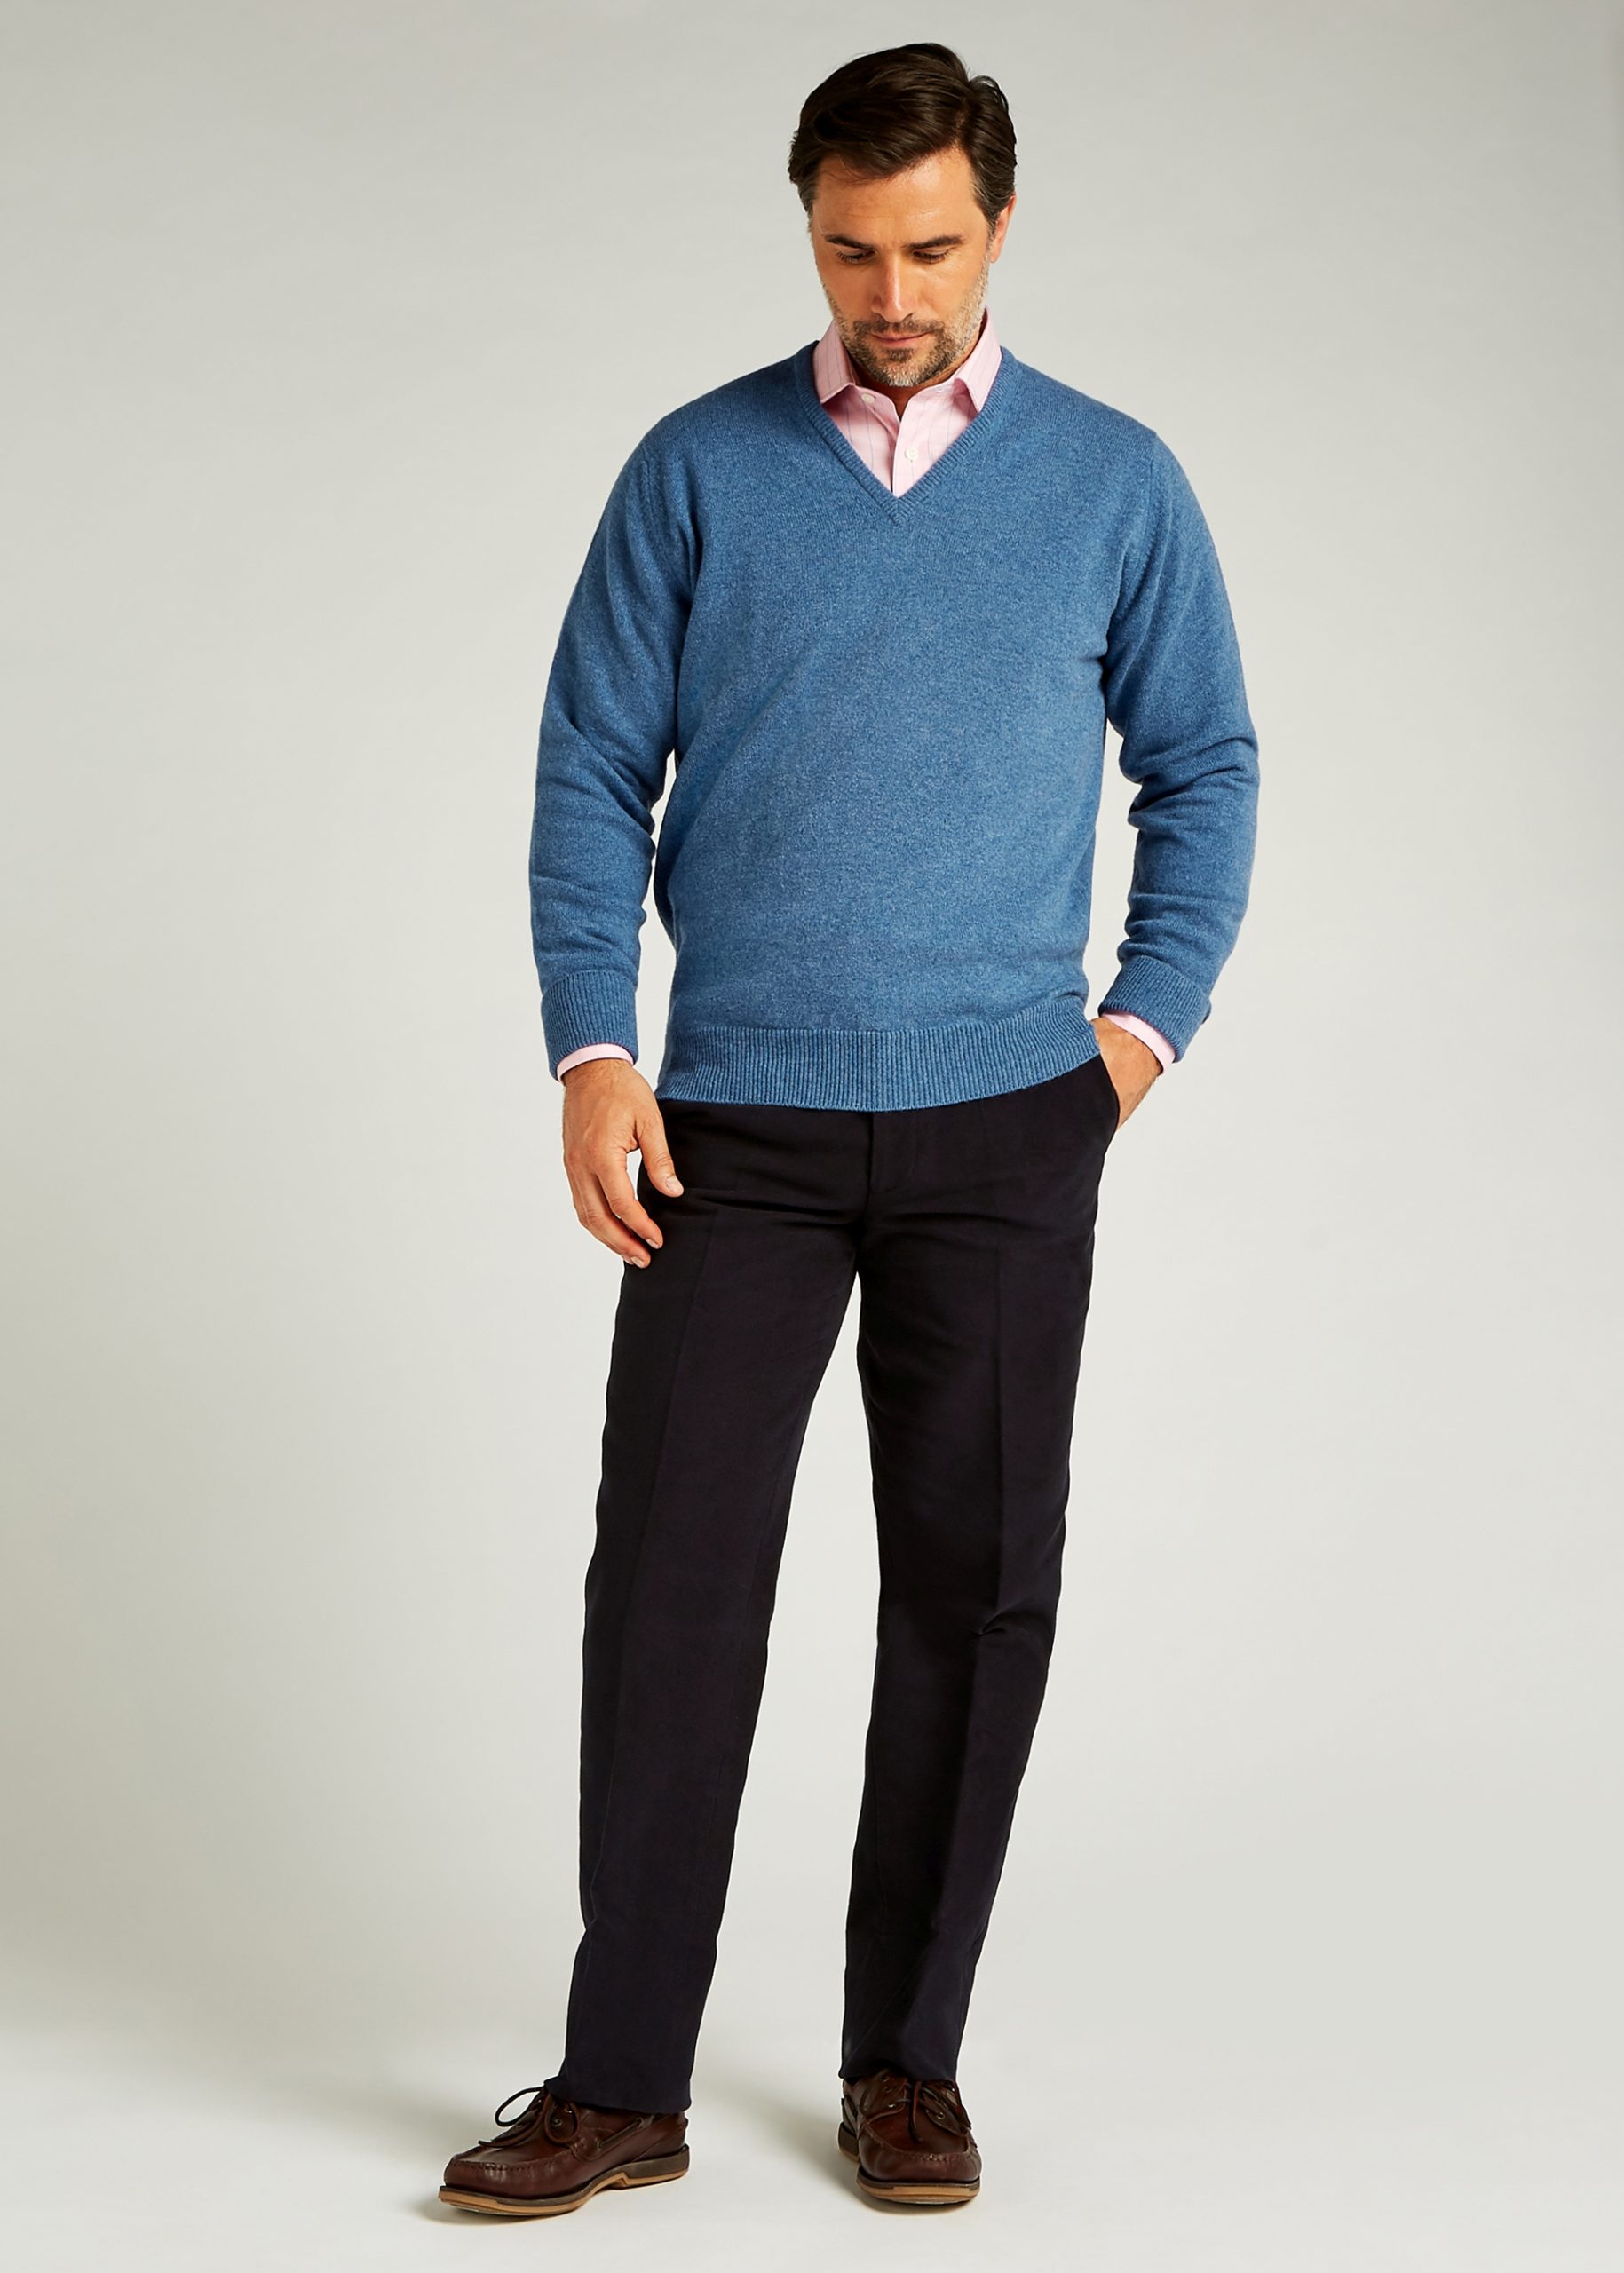 Roderick Charles lambswool sweater in Clyde